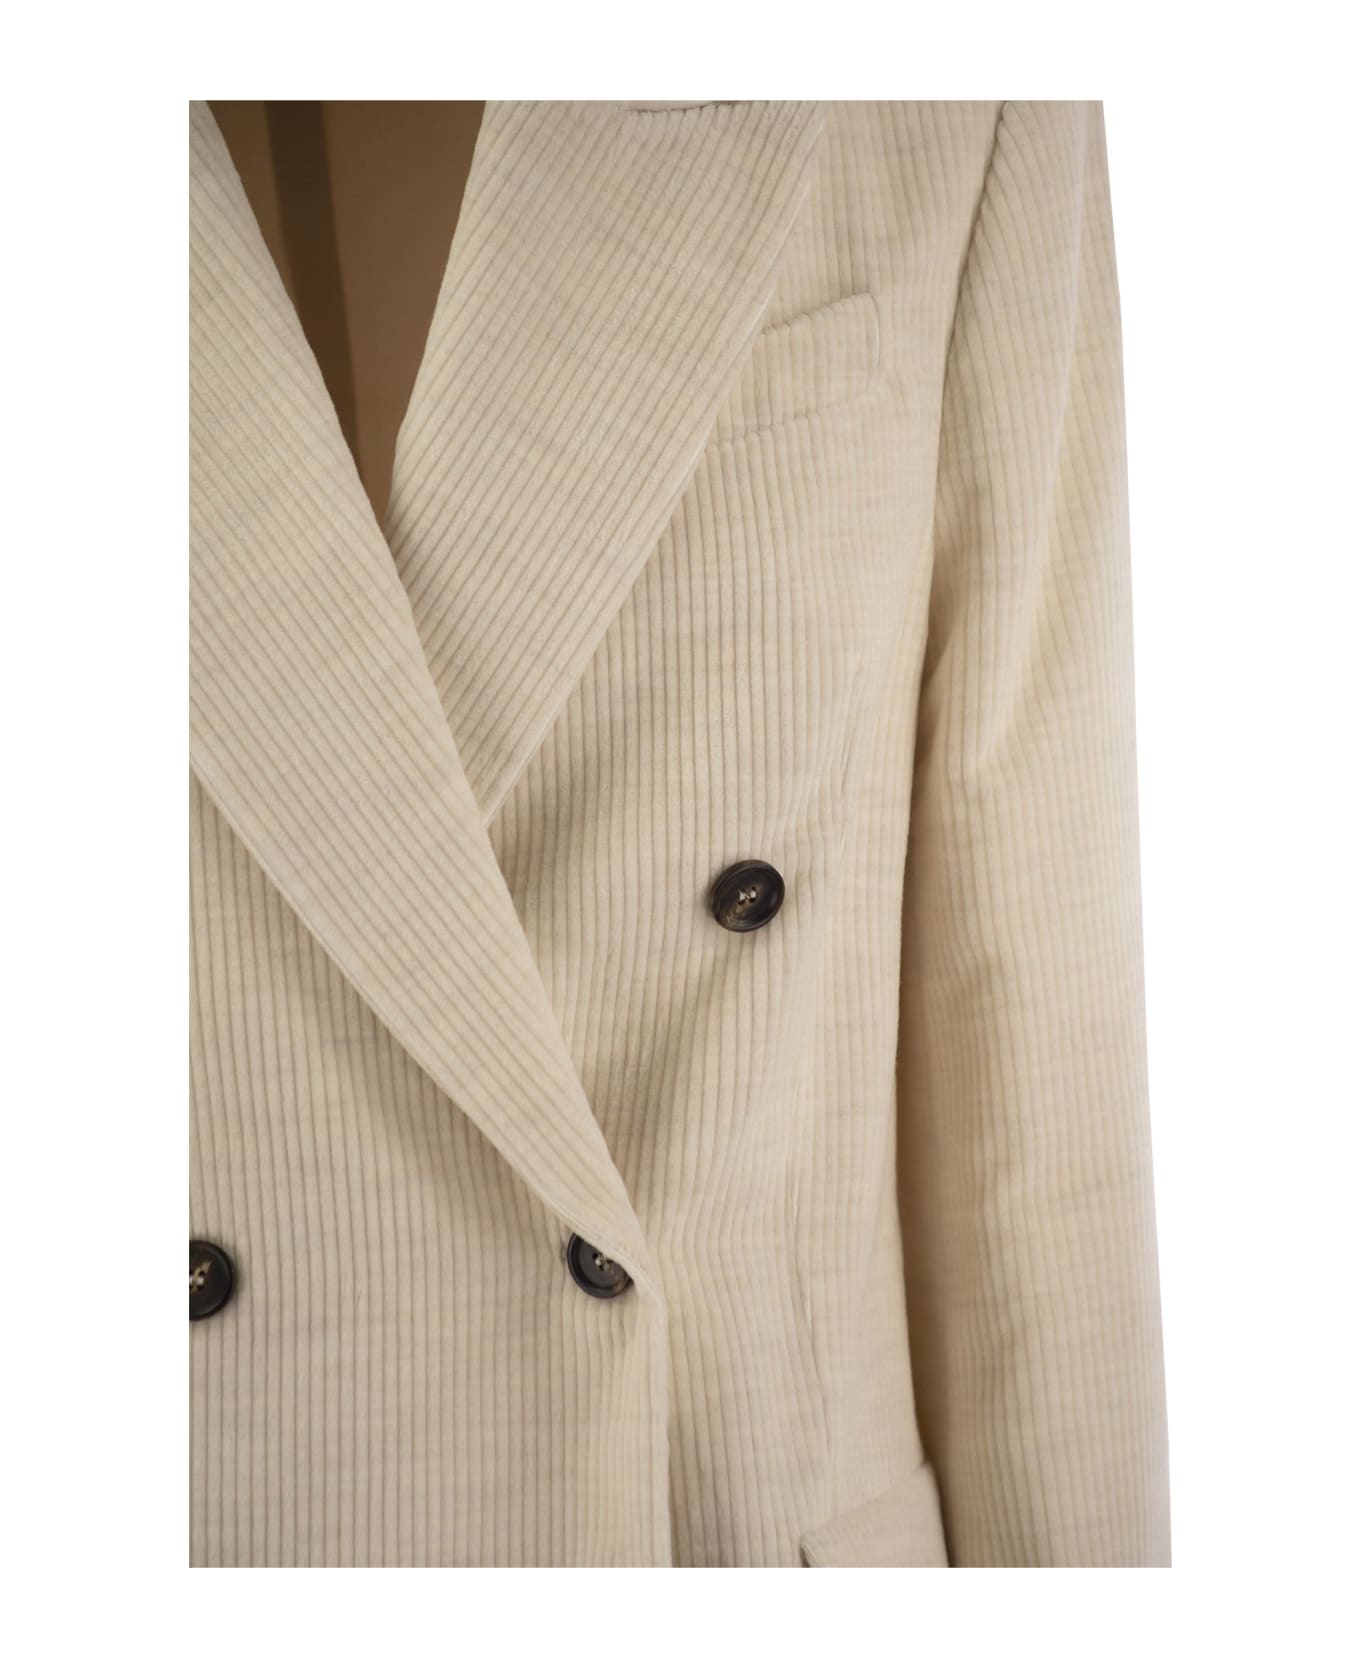 Brunello Cucinelli Viscose And Cotton Corduroy Jacket With Necklace - Ivory